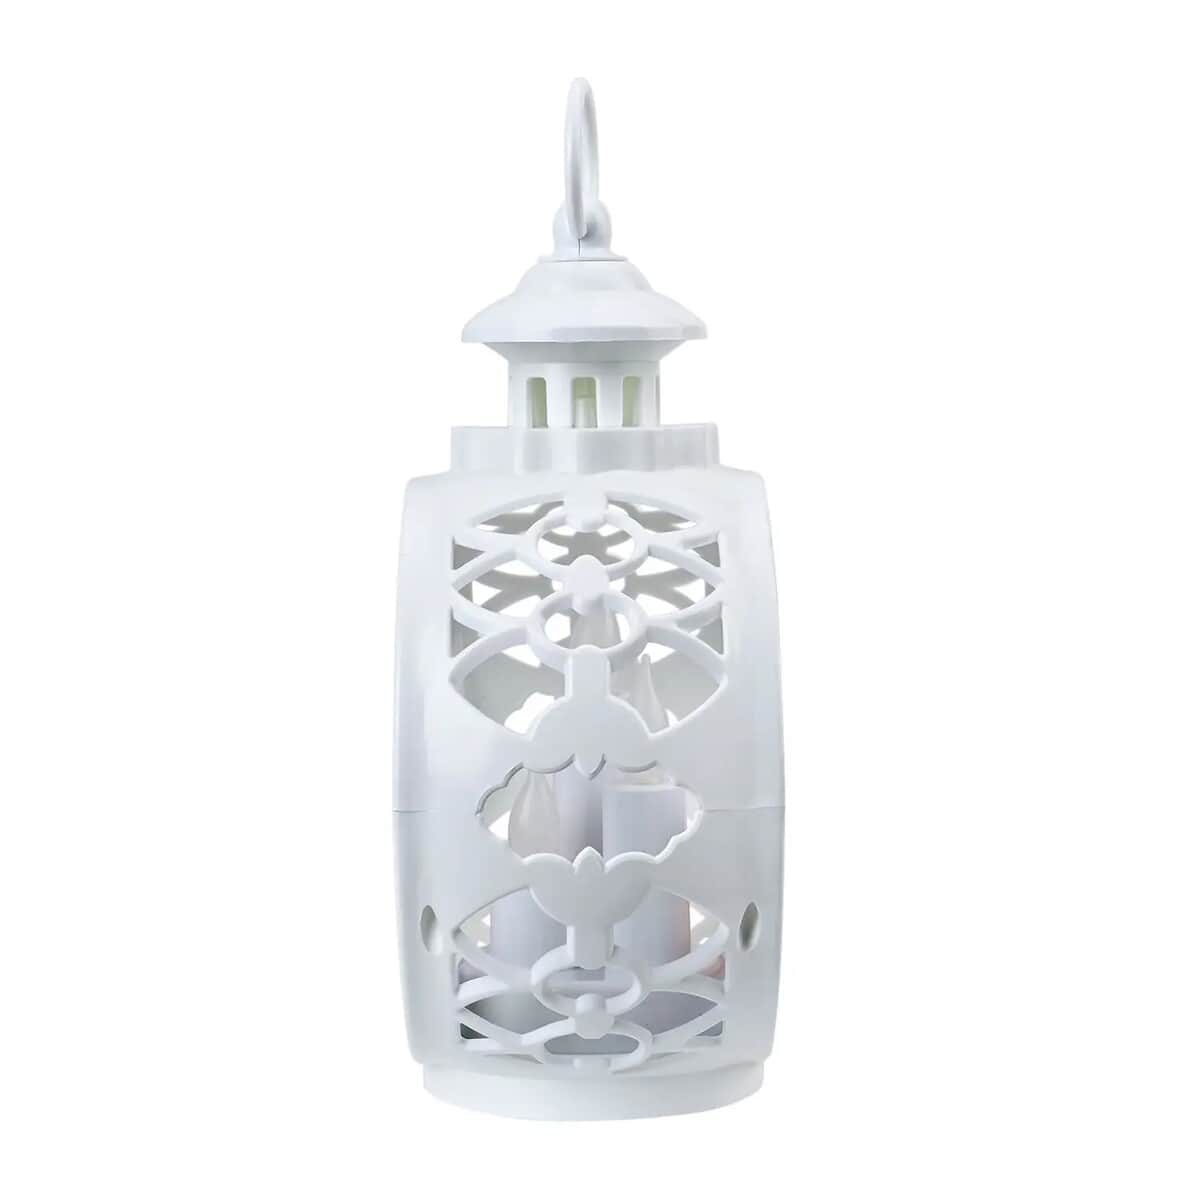 Hanging Lantern Christmas LED Light (3*AAA Batteries Not Included) - White (6.88"x3.81"9.56") image number 5